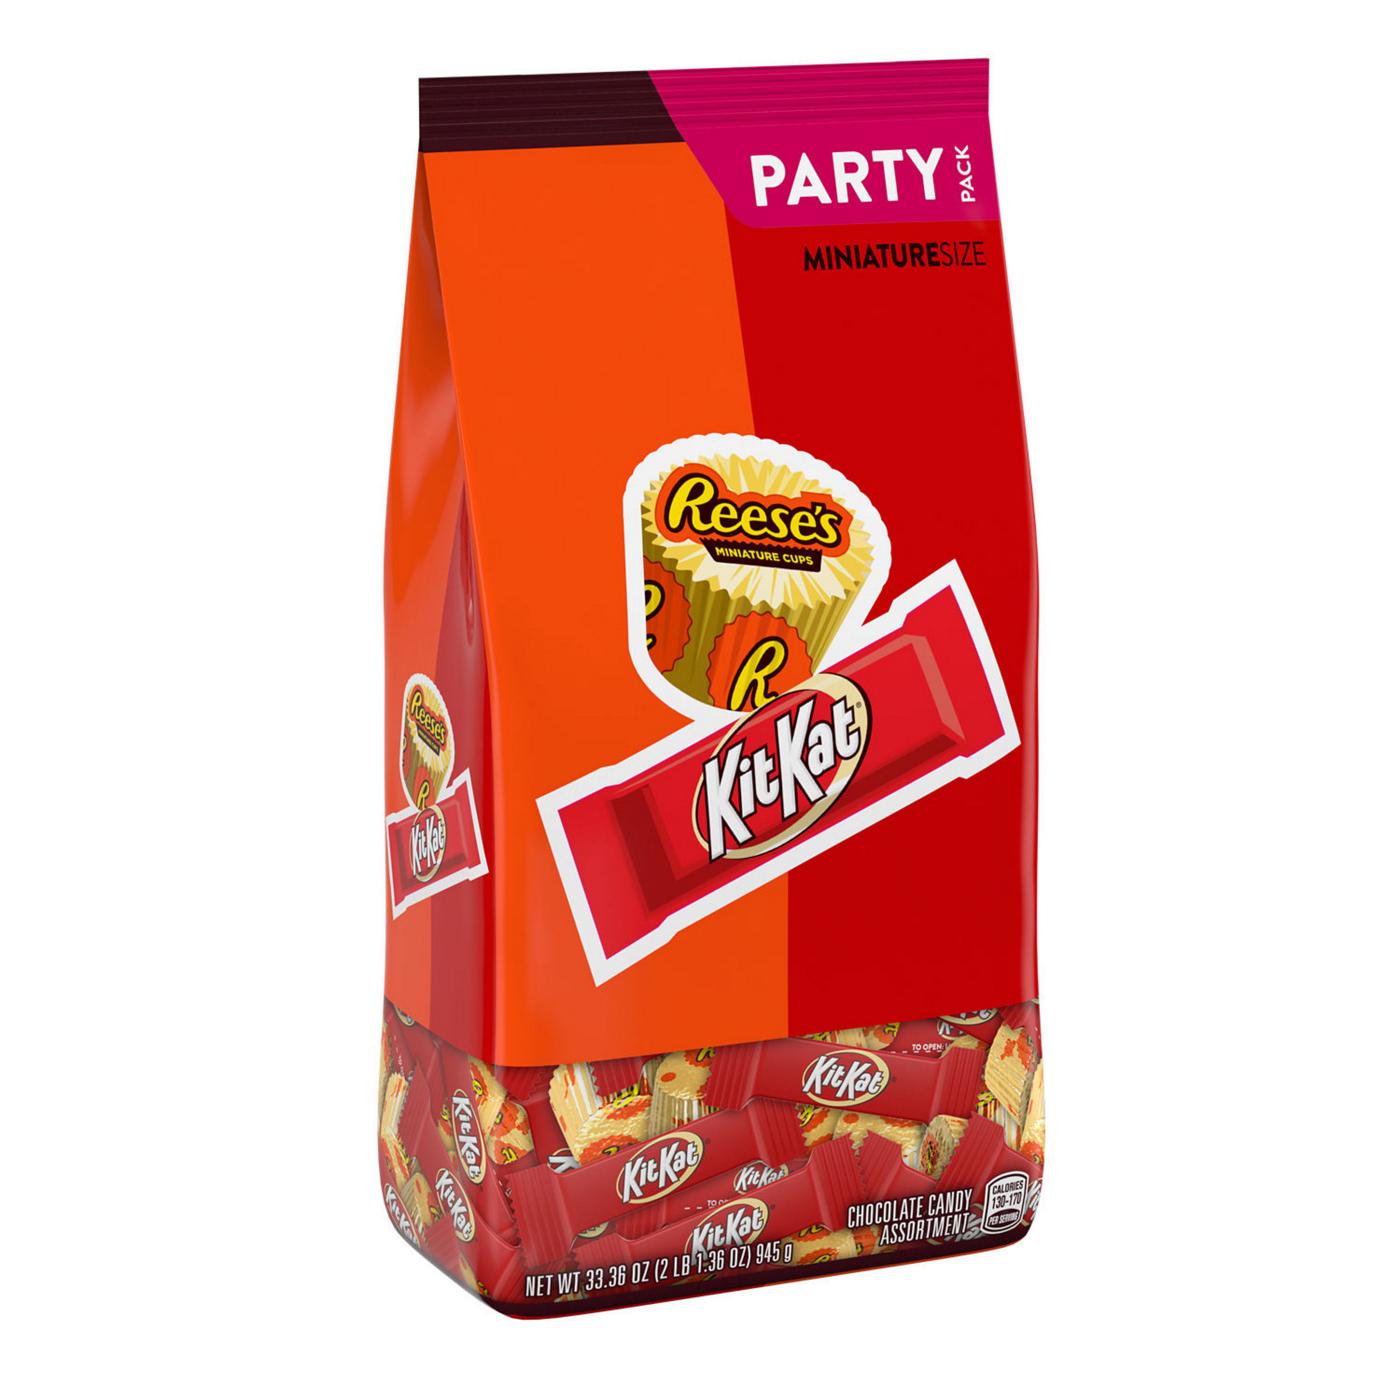 Kit Kat & Reese's Assorted Miniature Size Candy - Party Pack; image 3 of 3